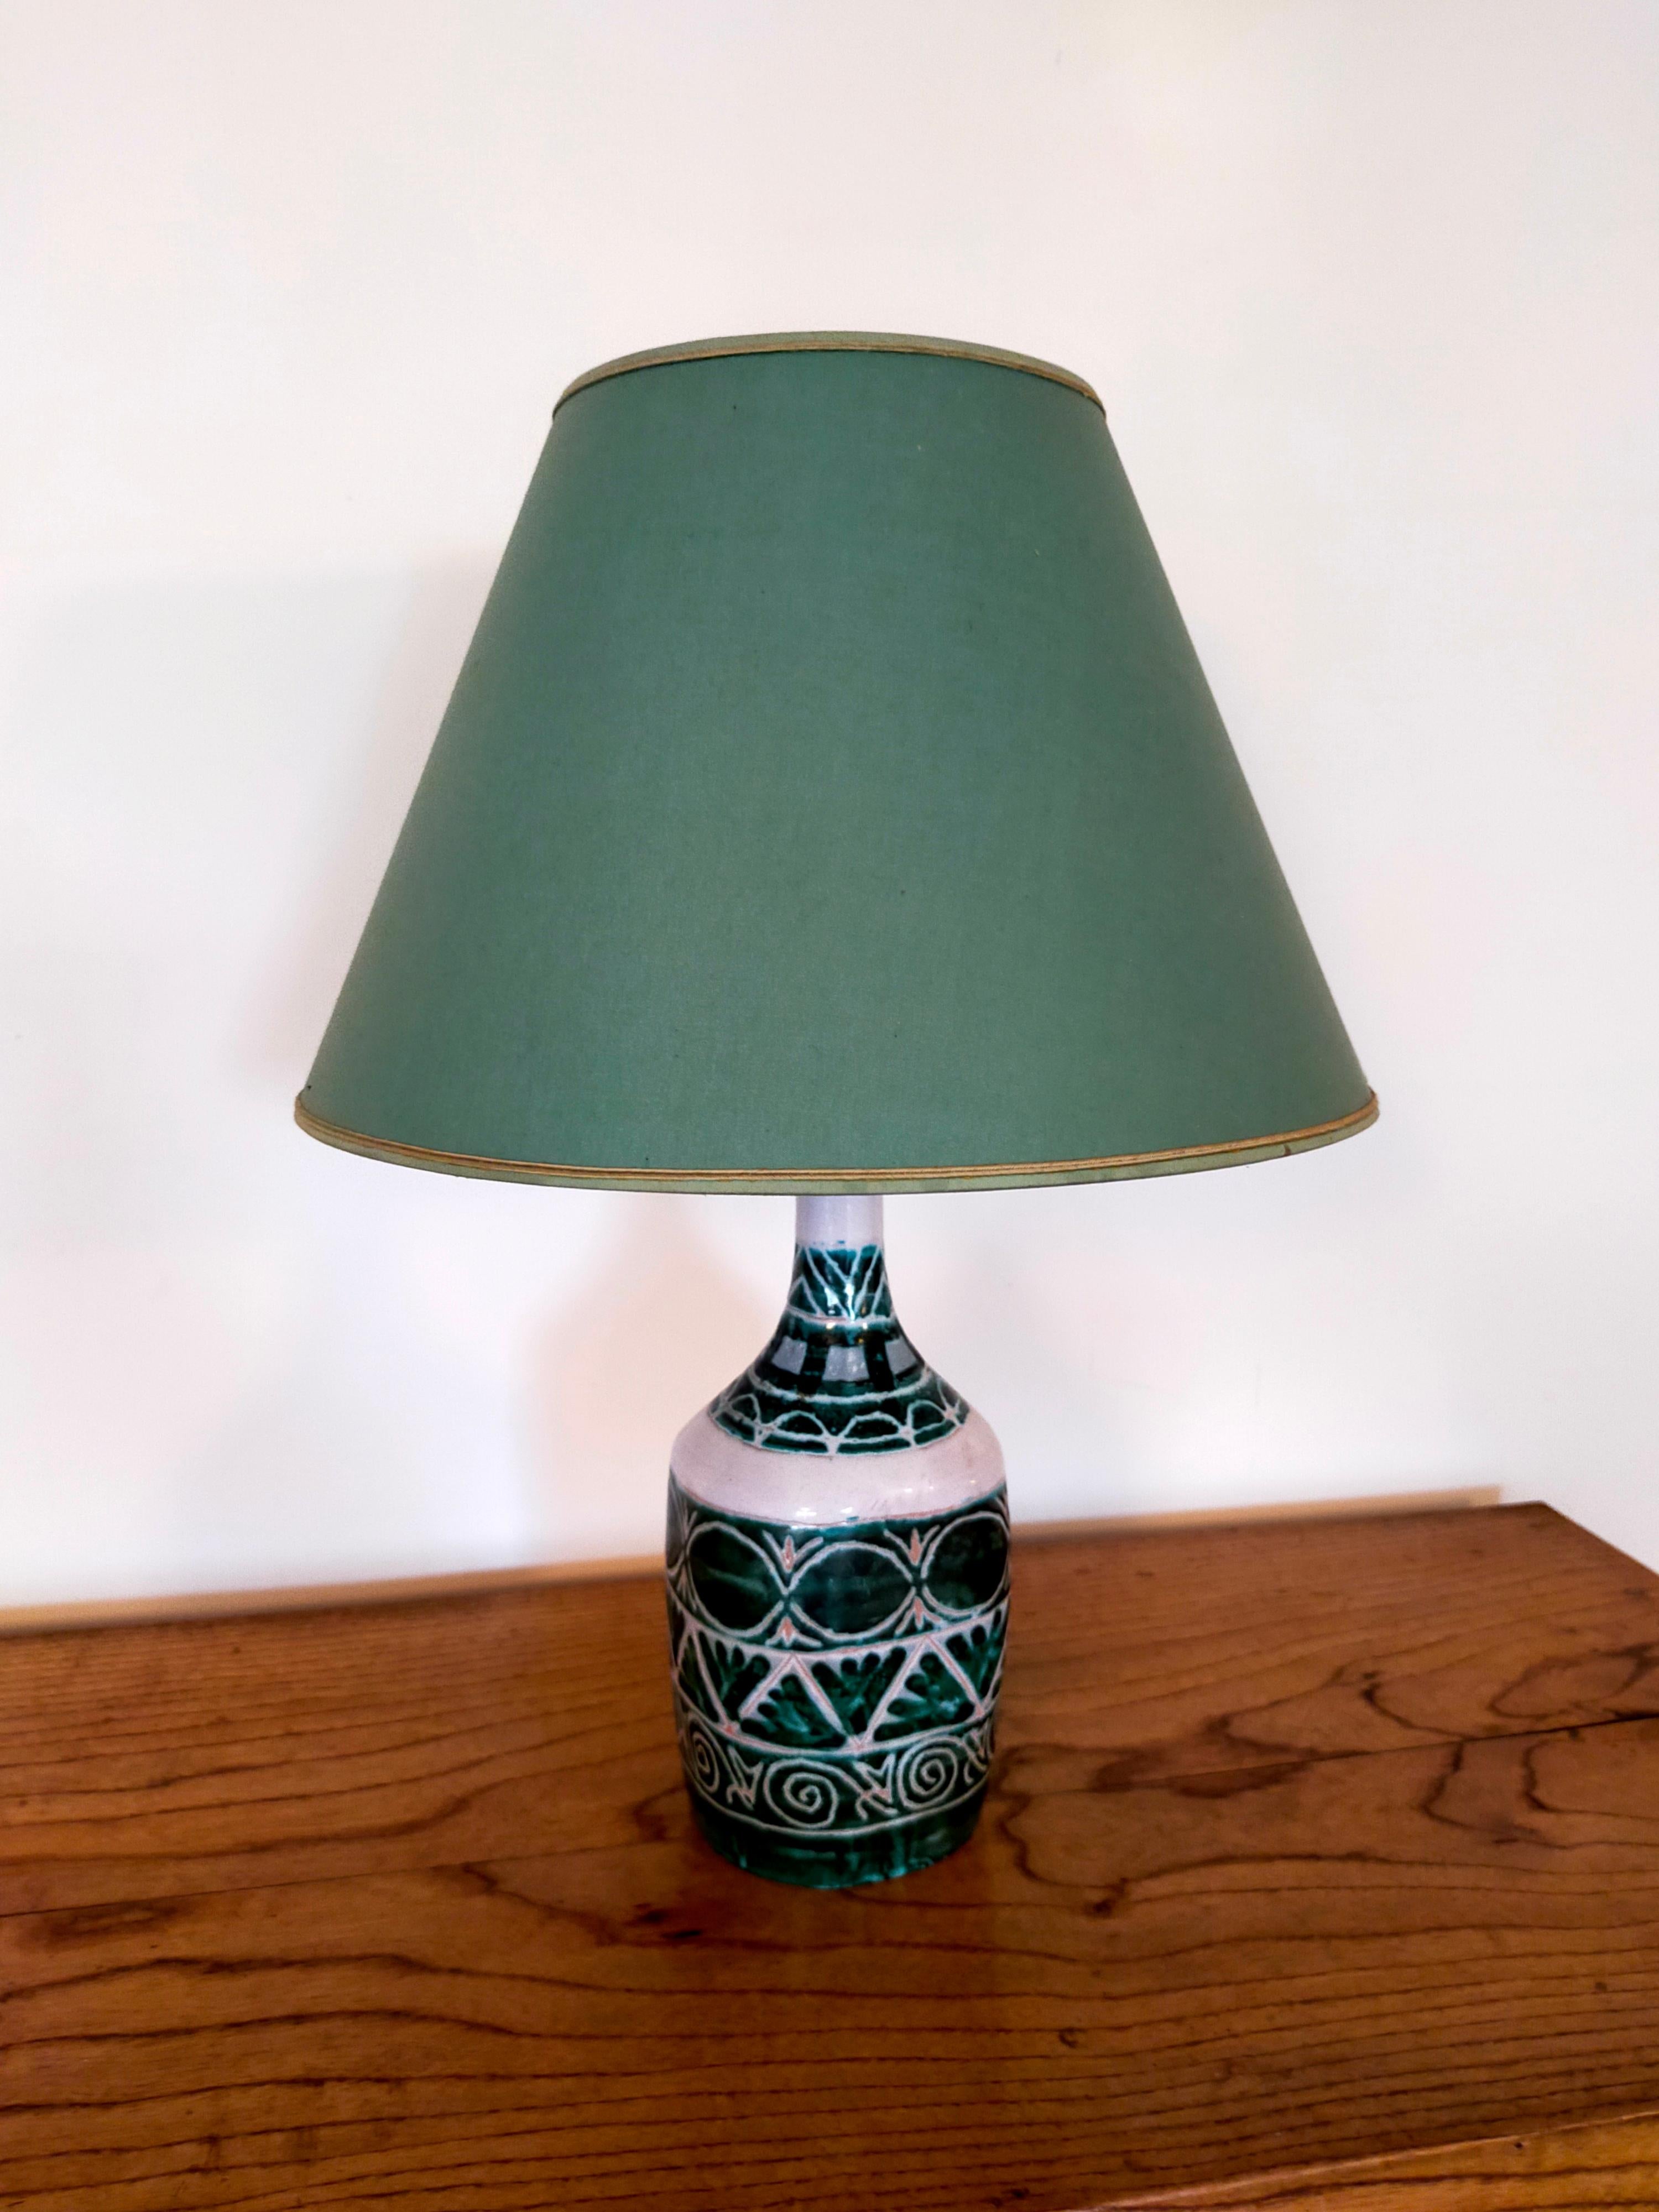 Green and white scarified ceramic lamp by Michel Alexandrov in Vallauris.
Signed Allix at the base.
Good condition.